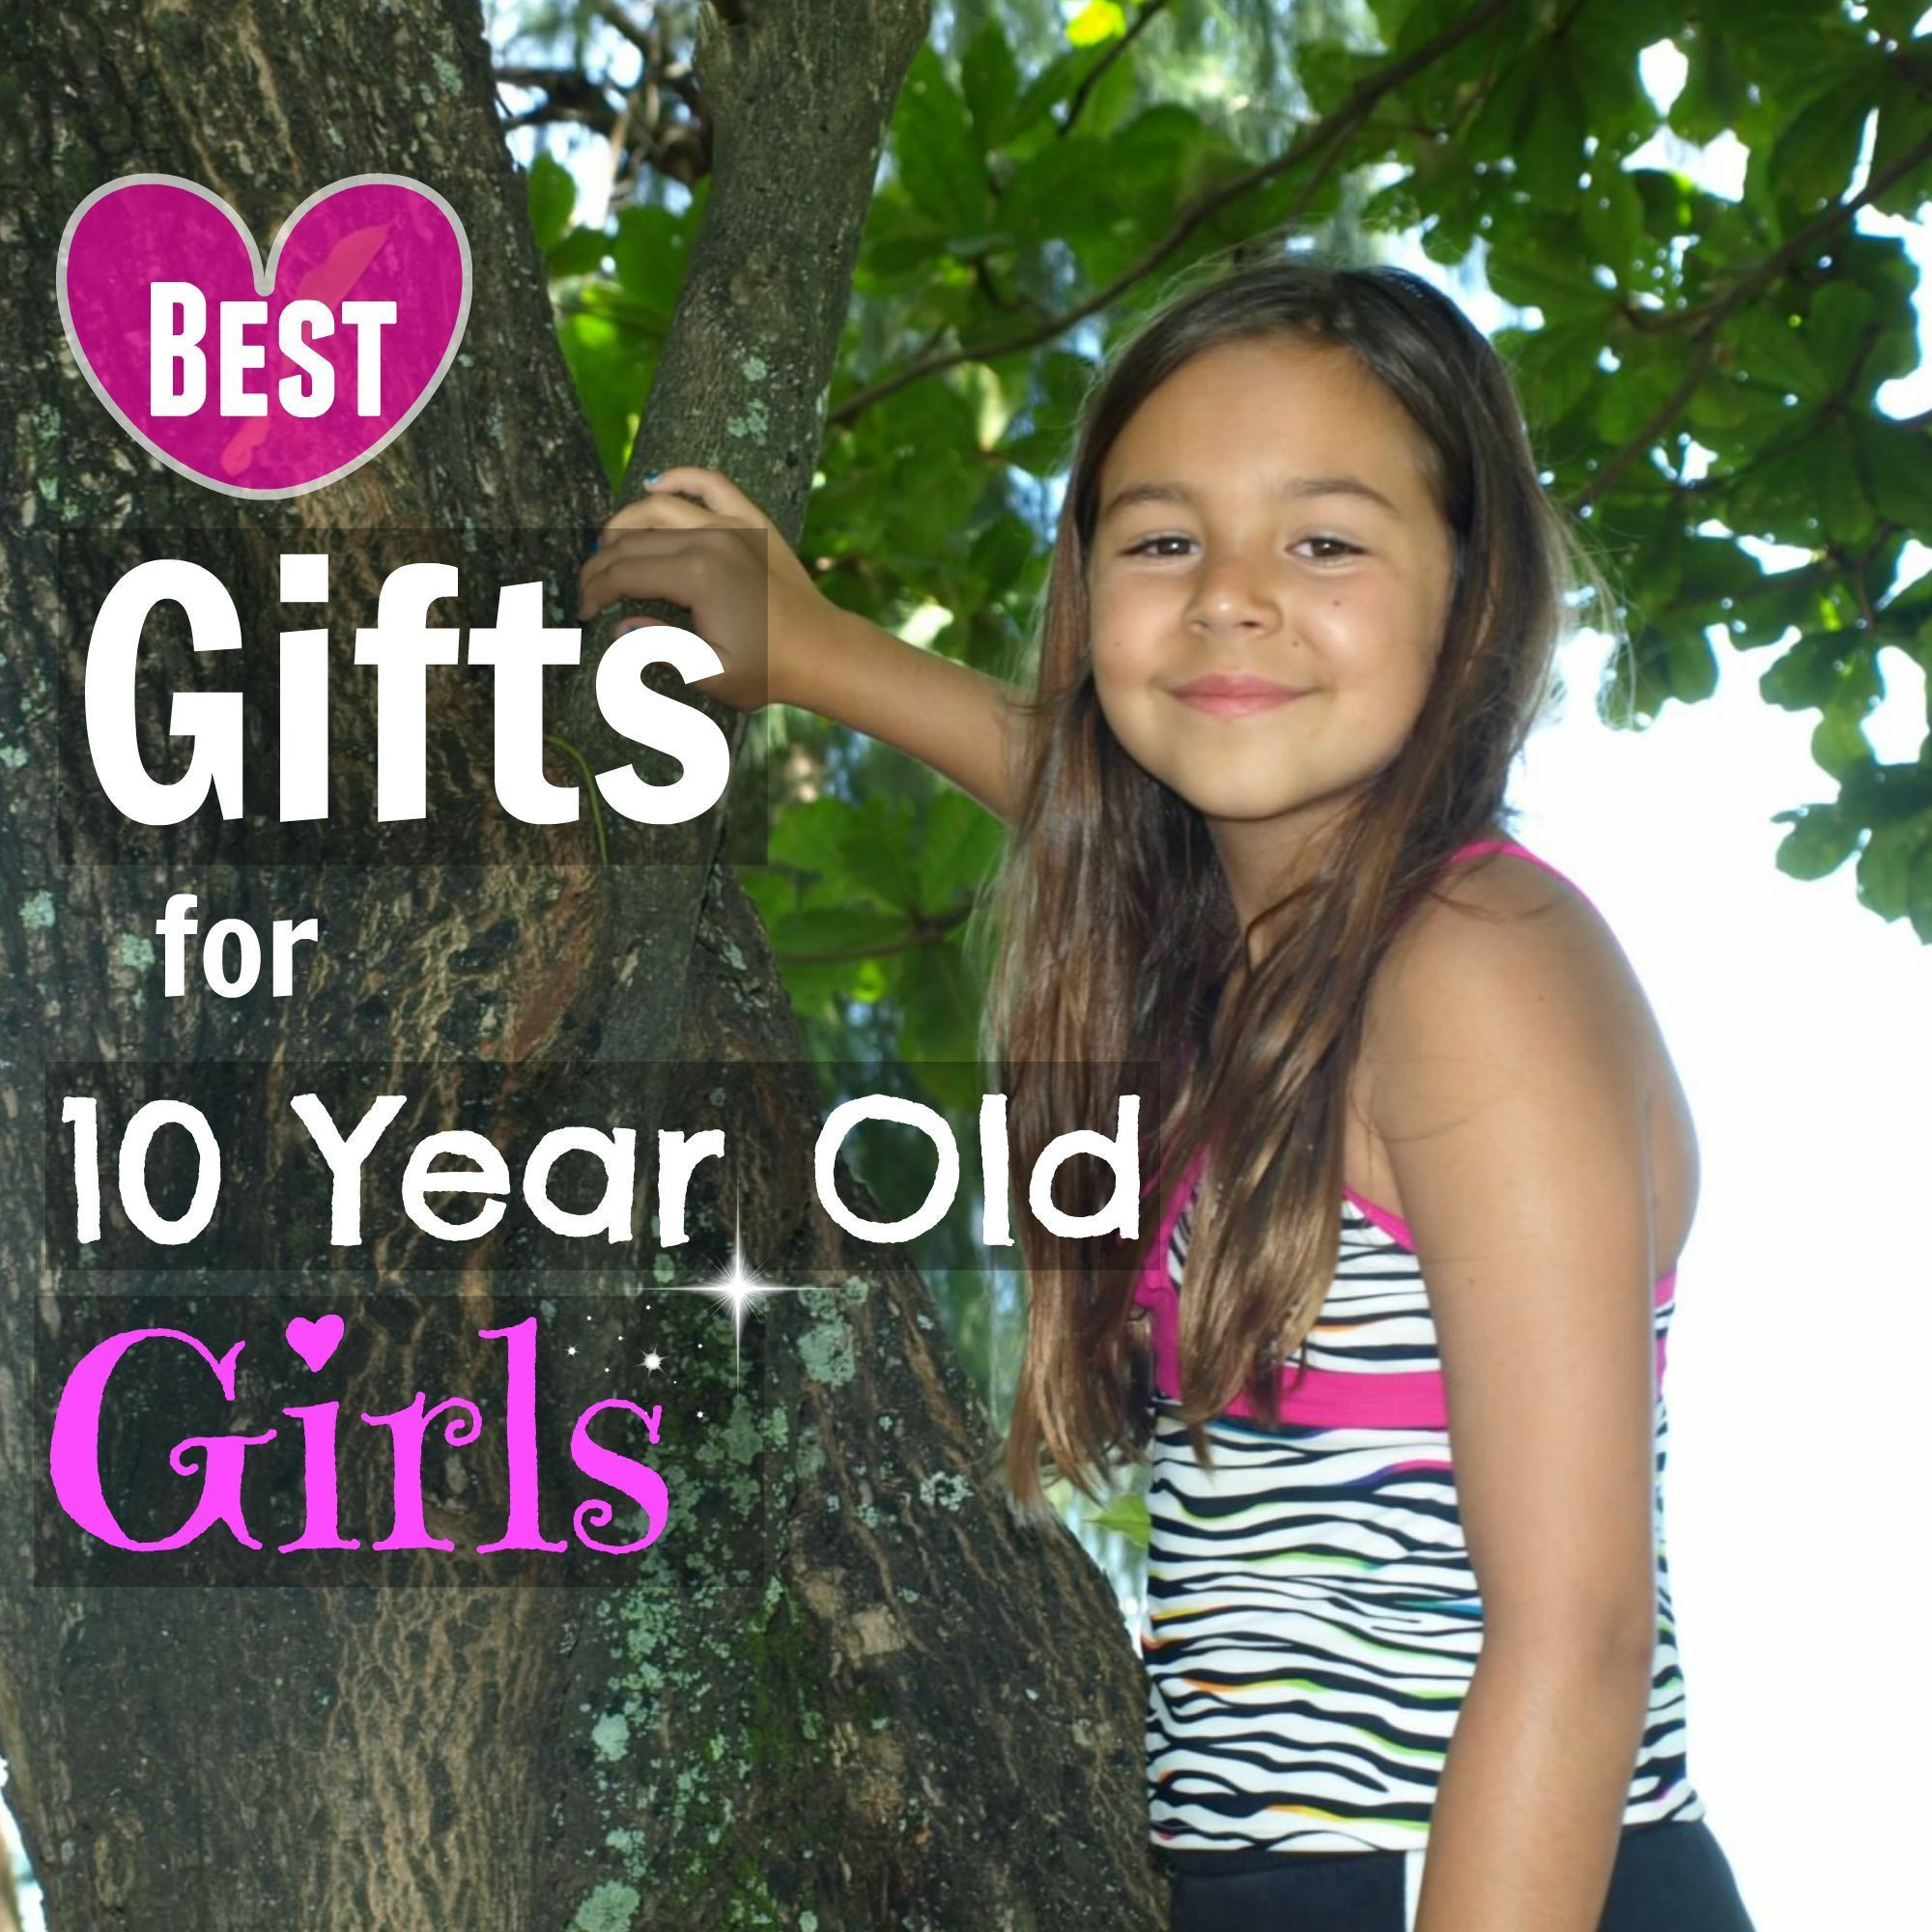 Gift Ideas For Ten Year Old Girls
 Best Christmas Toys for 10 Year Old Girls 2017